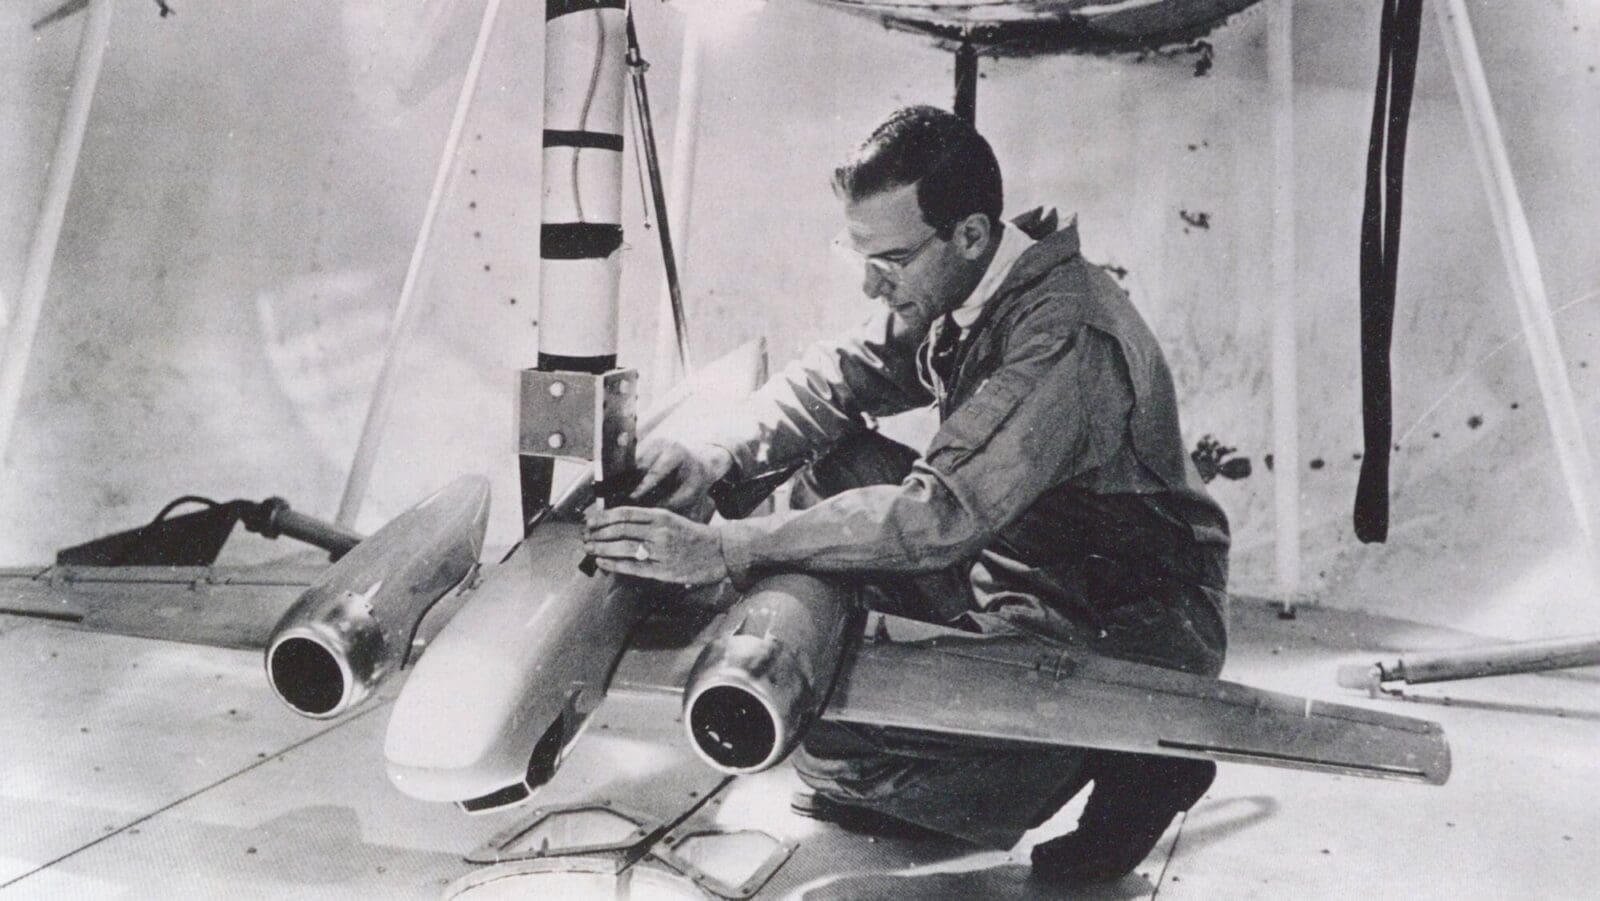 Research kneels while working on large model airplane (black and white)